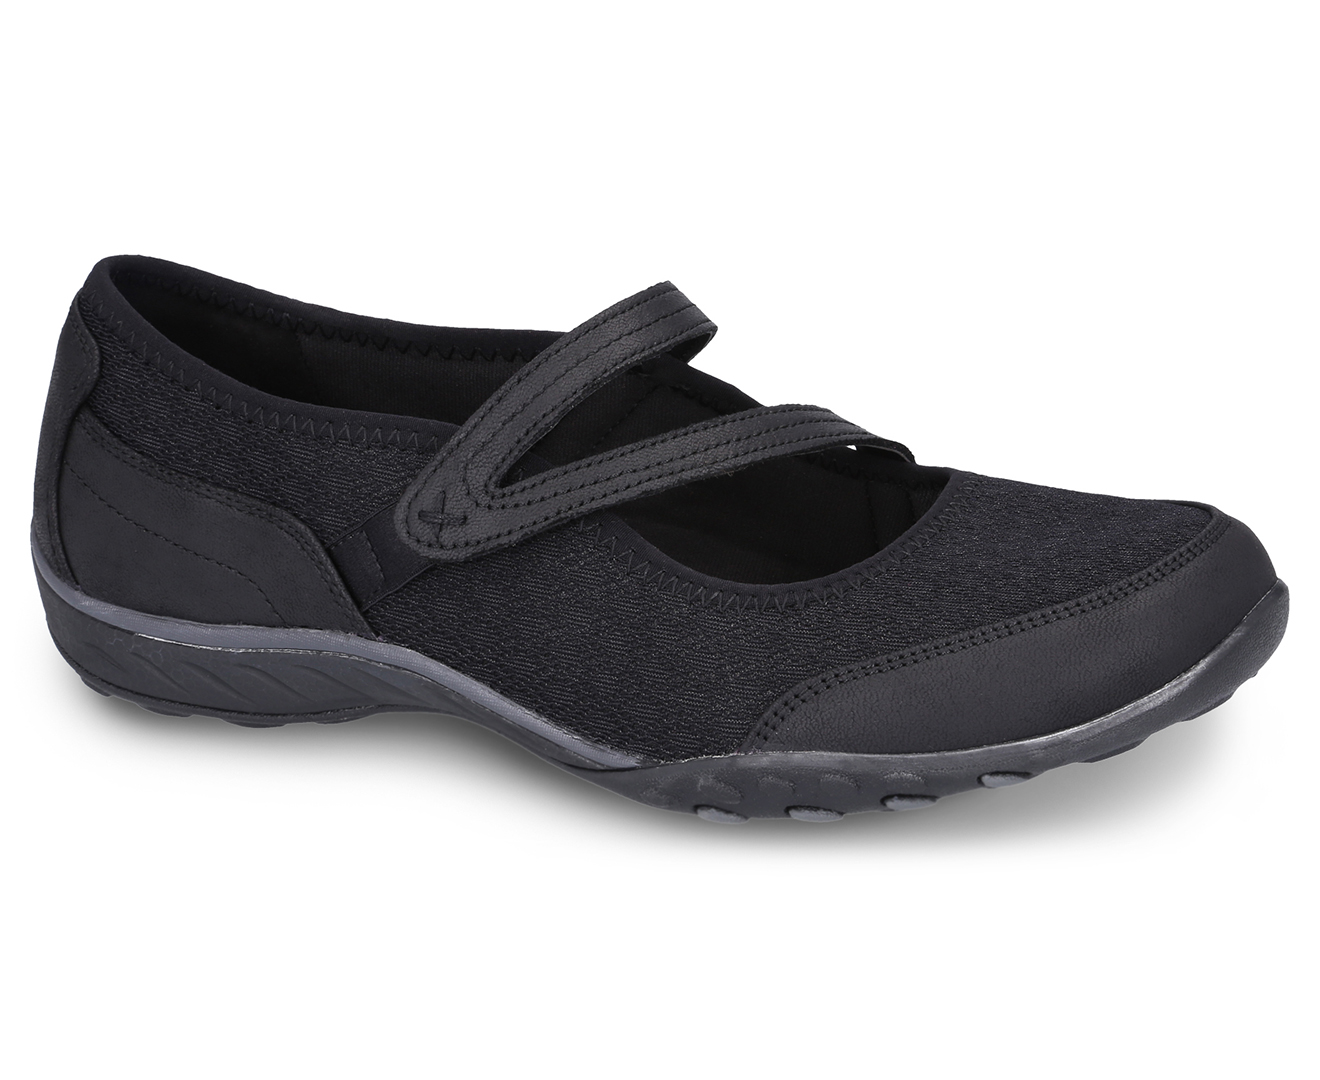 Skechers Women's Relaxed Fit Breathe Easy In Good Spirits Shoes - Black ...